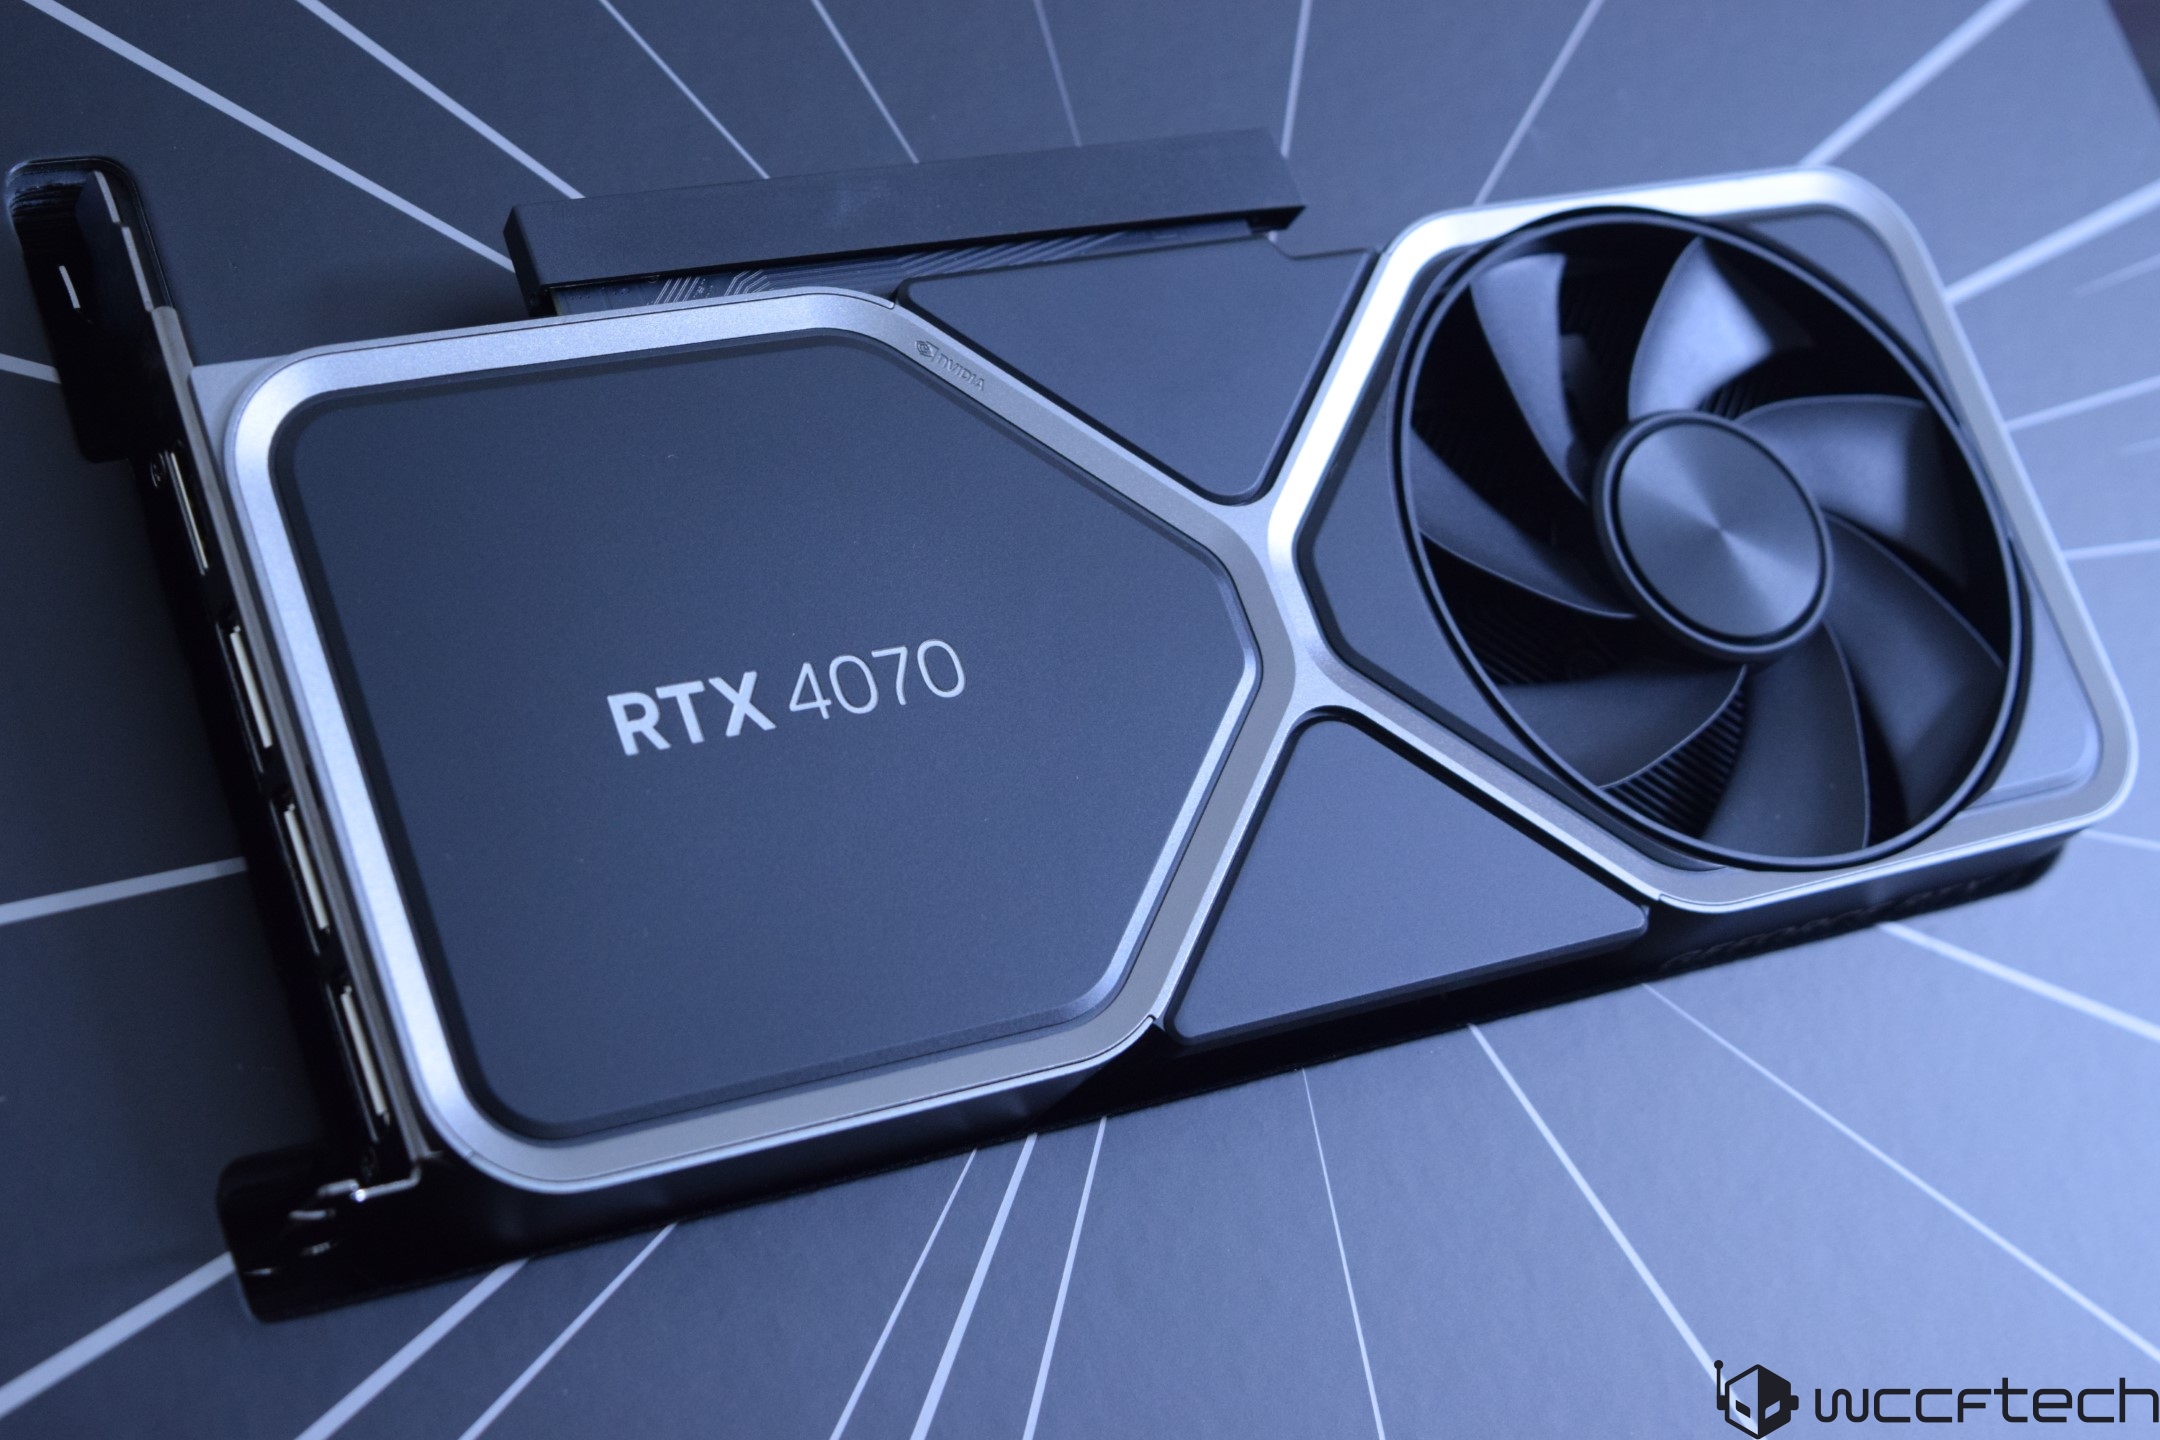 NVIDIA GeForce RTX 4070 To Get AD103 GPU Flavor With The Same Specs 1